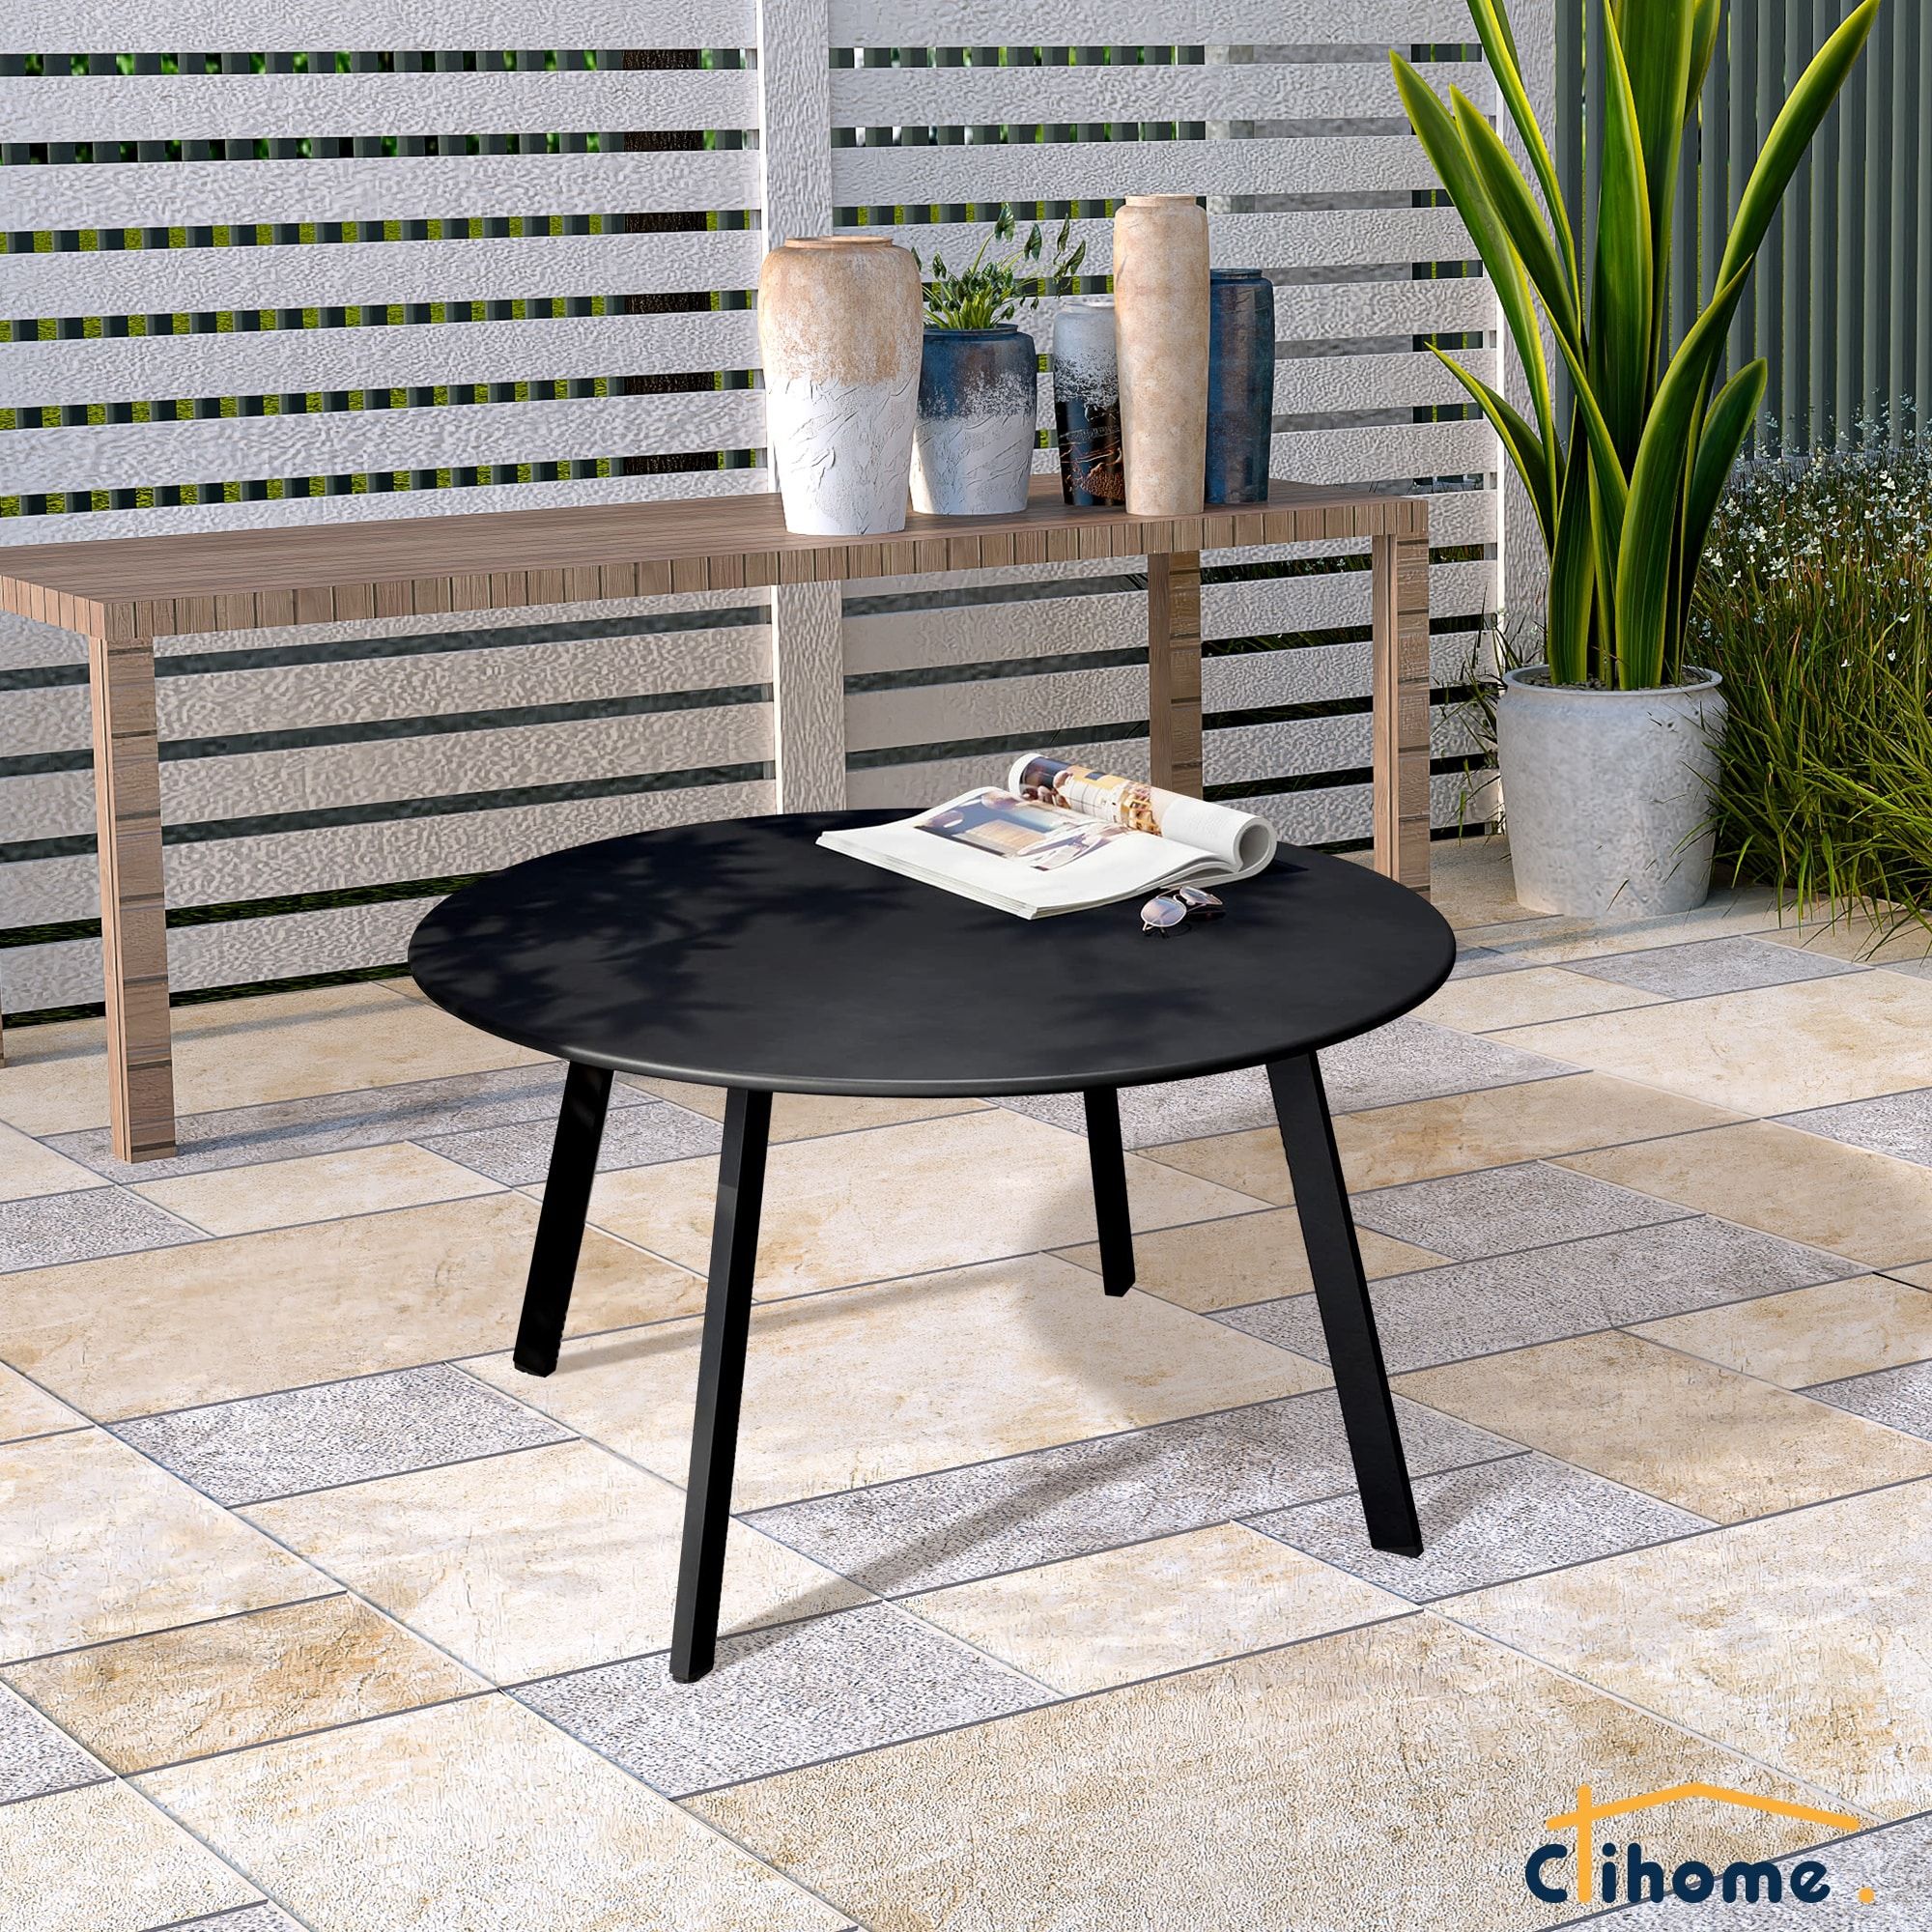 Clihome Weather Resistant Round Steel Patio Large Coffee Table – On Sale –  Bed Bath & Beyond – 36089720 Pertaining To Round Steel Patio Coffee Tables (View 3 of 15)